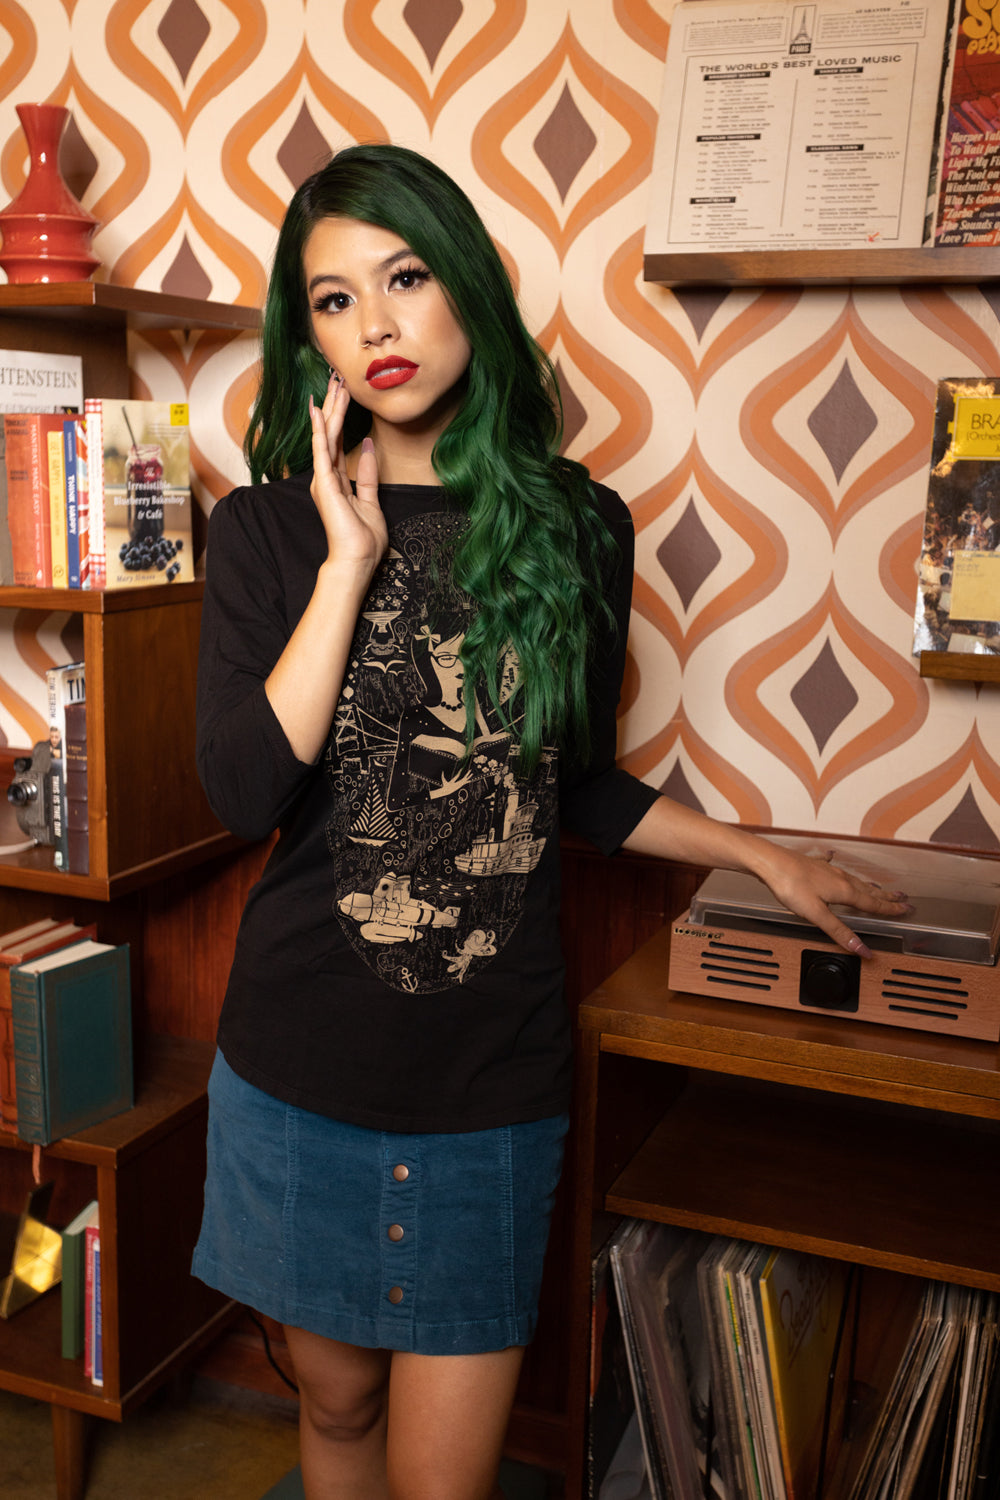 Model in black 3/4 sleeve tee featuring a smart girl reading a book surrounded by intriguing images